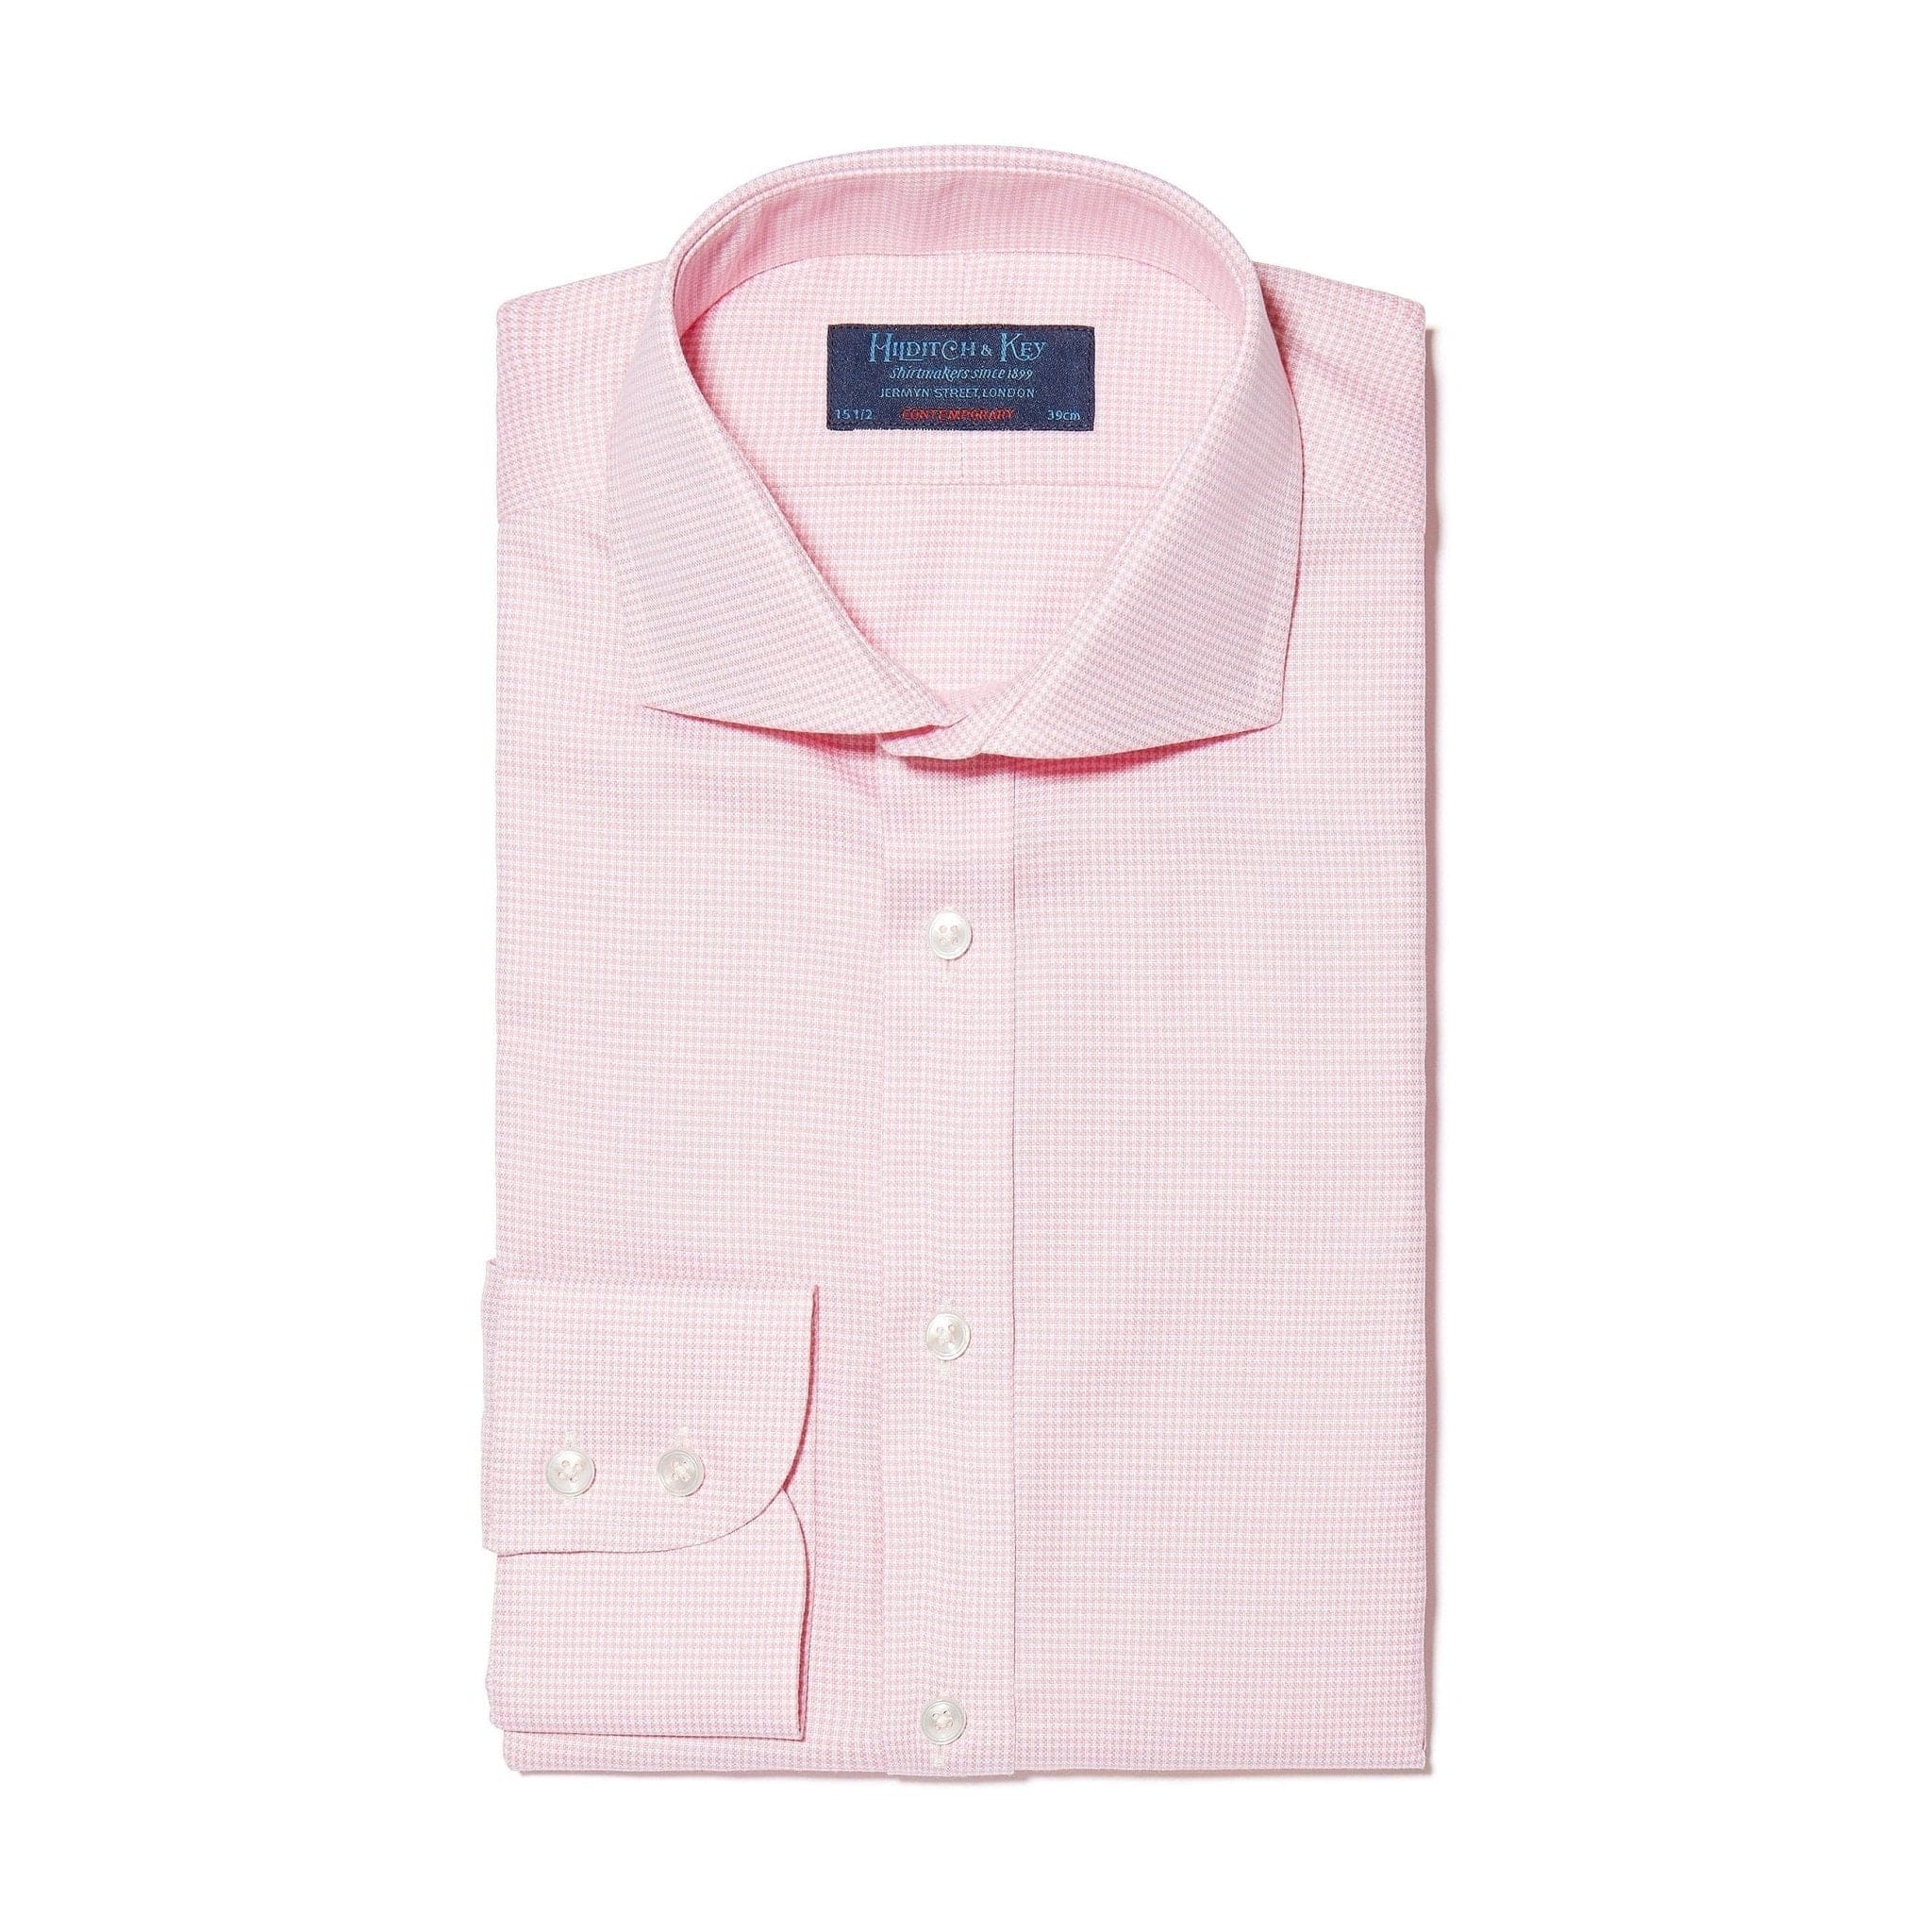 Contemporary Fit, Cut-away Collar, 2 Button Cuff Shirt in Pink Houndstooth Cotton